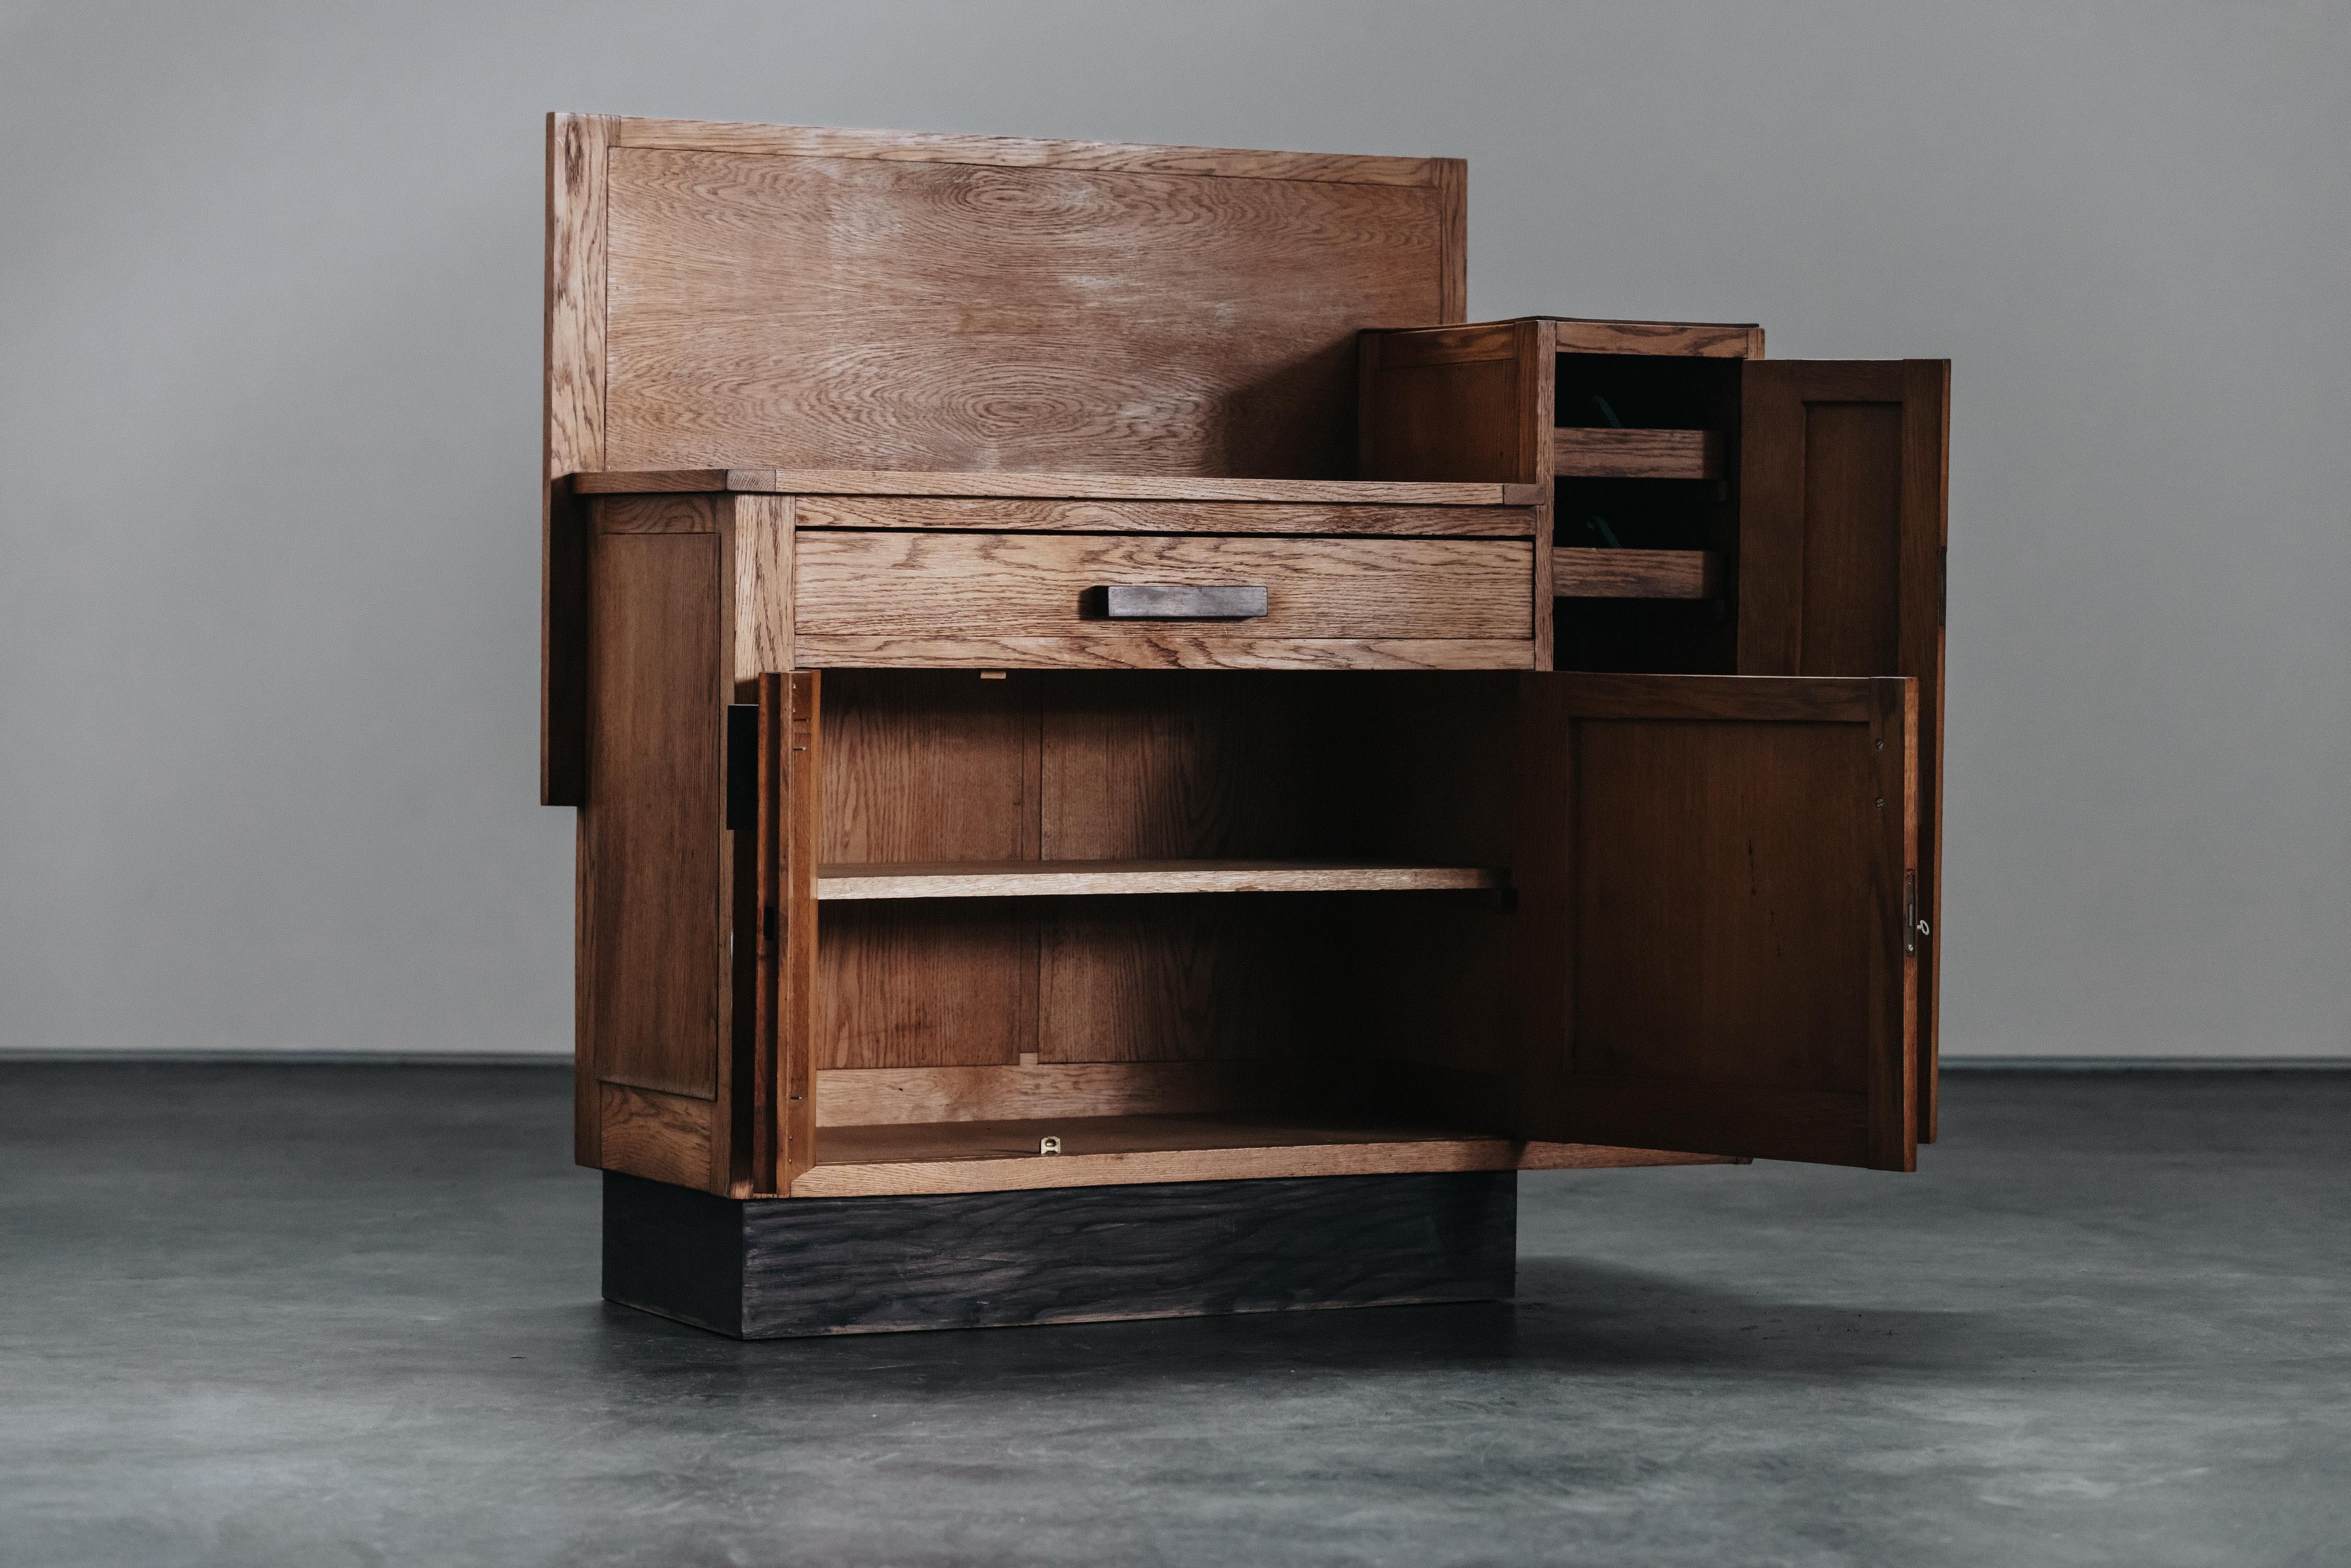 Vintage Oak Cabinet From Netherlands, Circa 1960.  Oak construction with light use and wear.